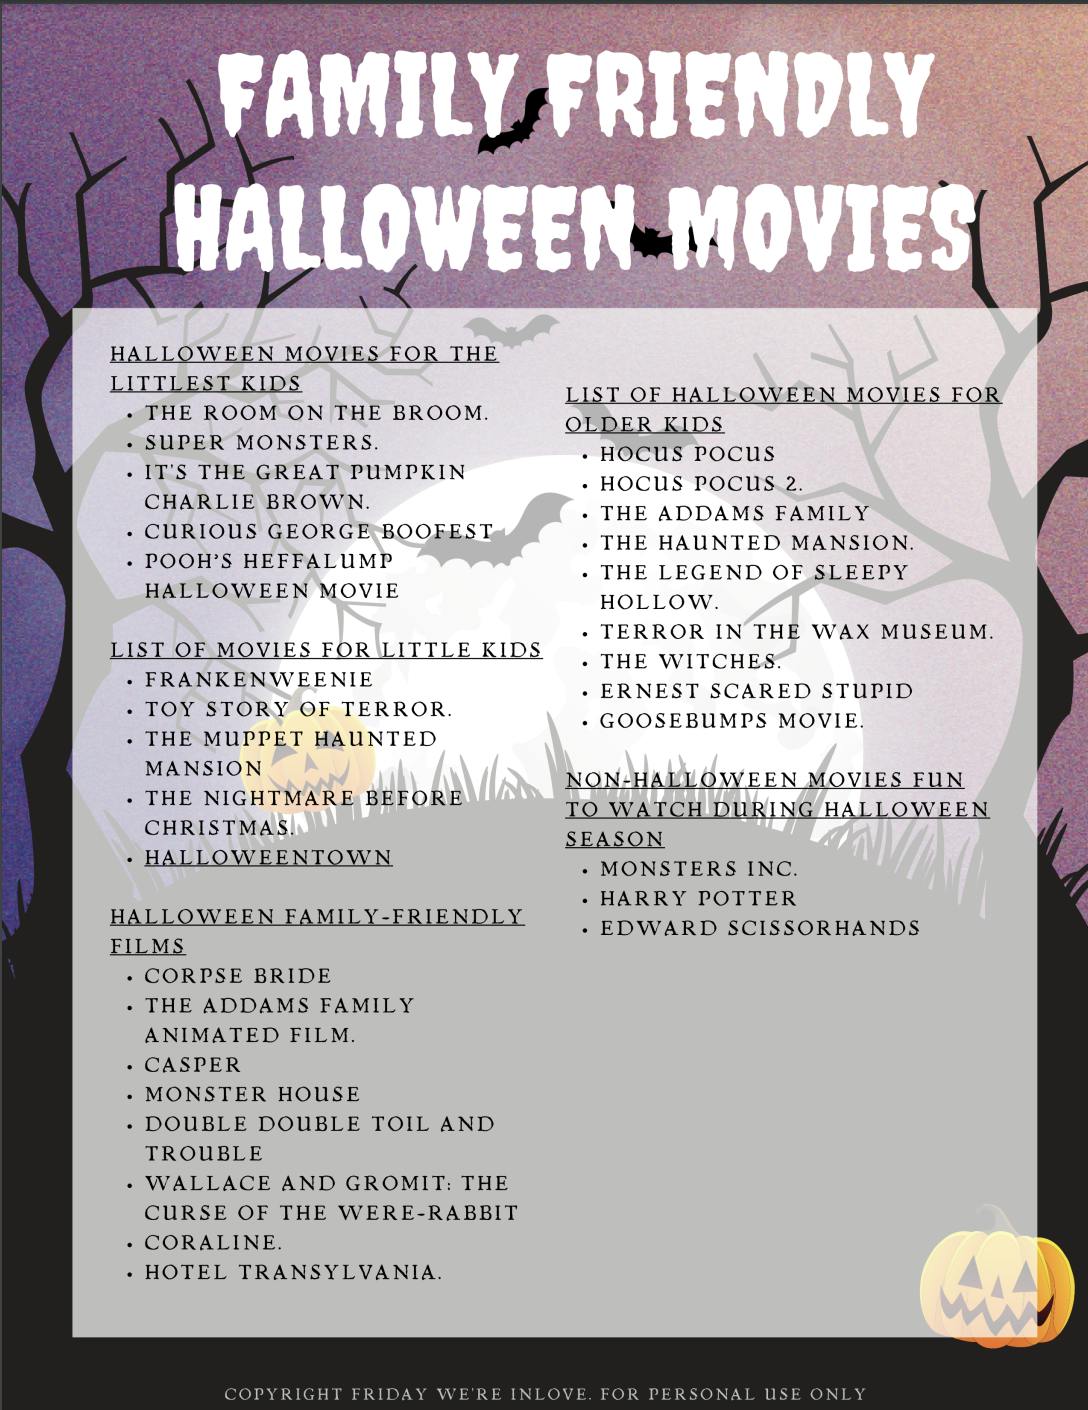 Halloween movies for kids with free movie list printable. 